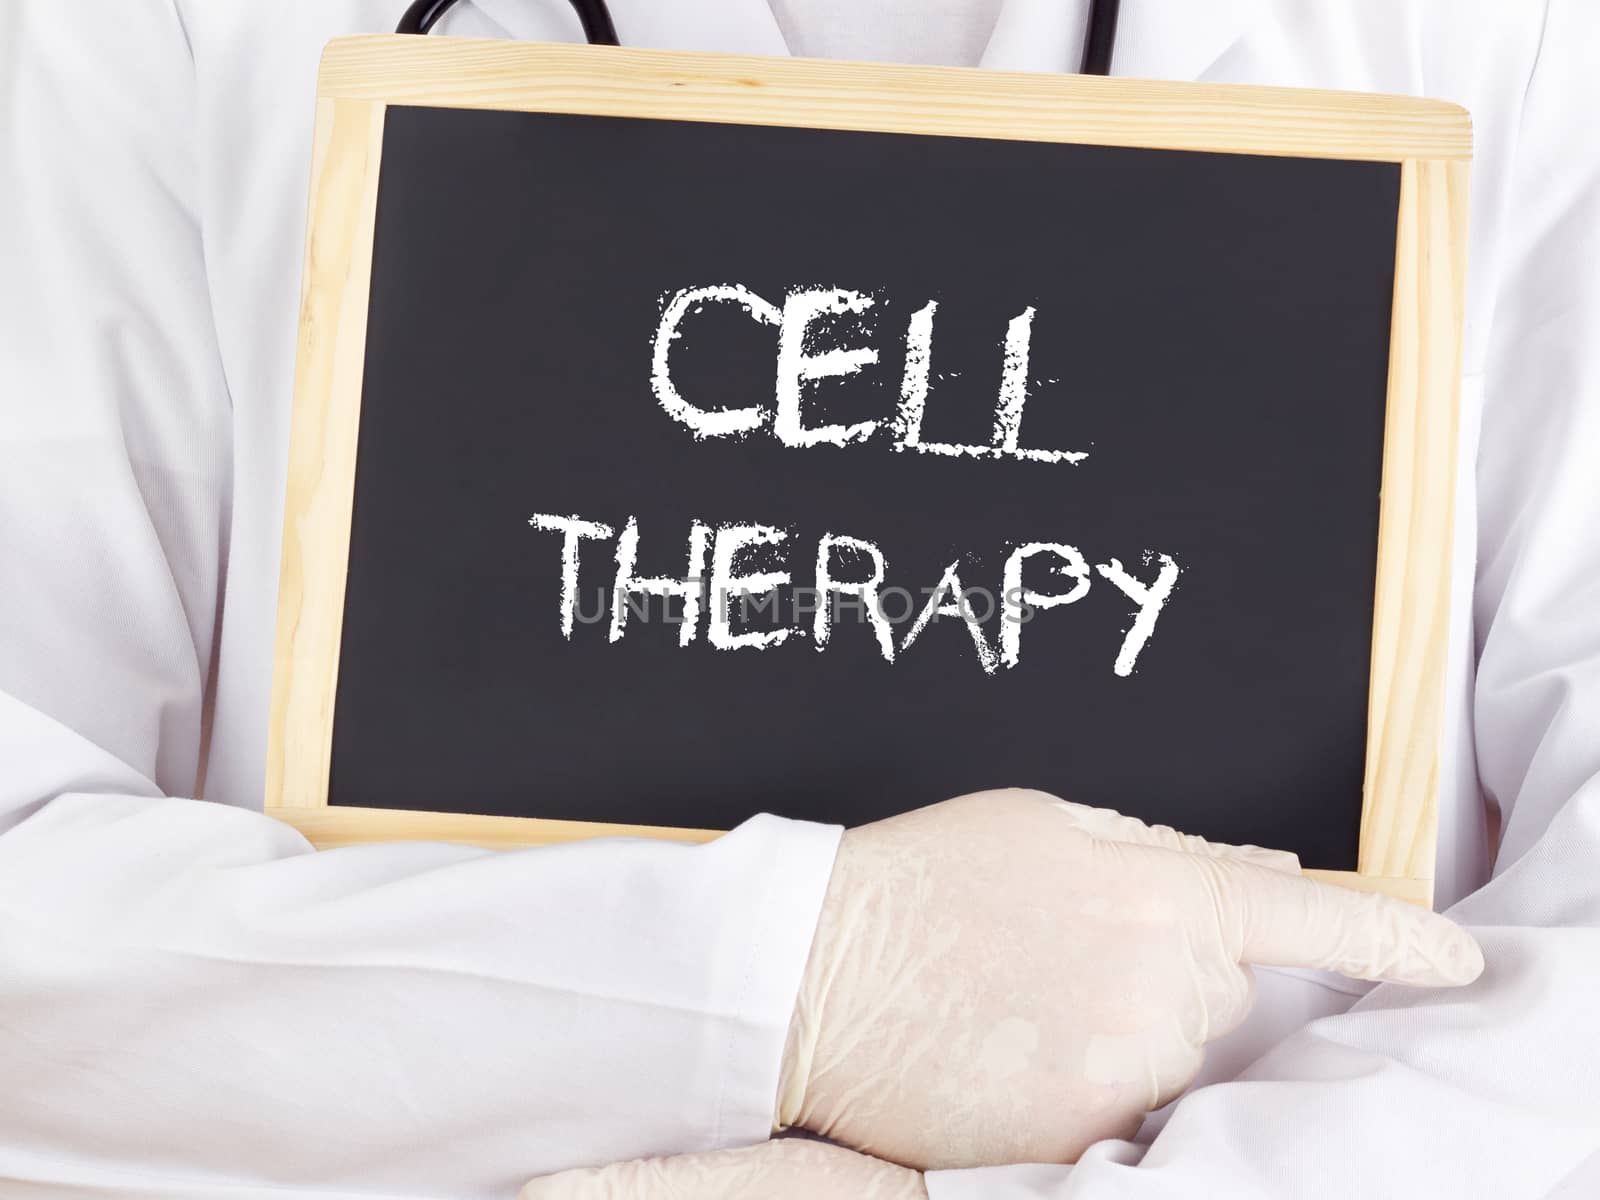 Doctor shows information: cell therapy